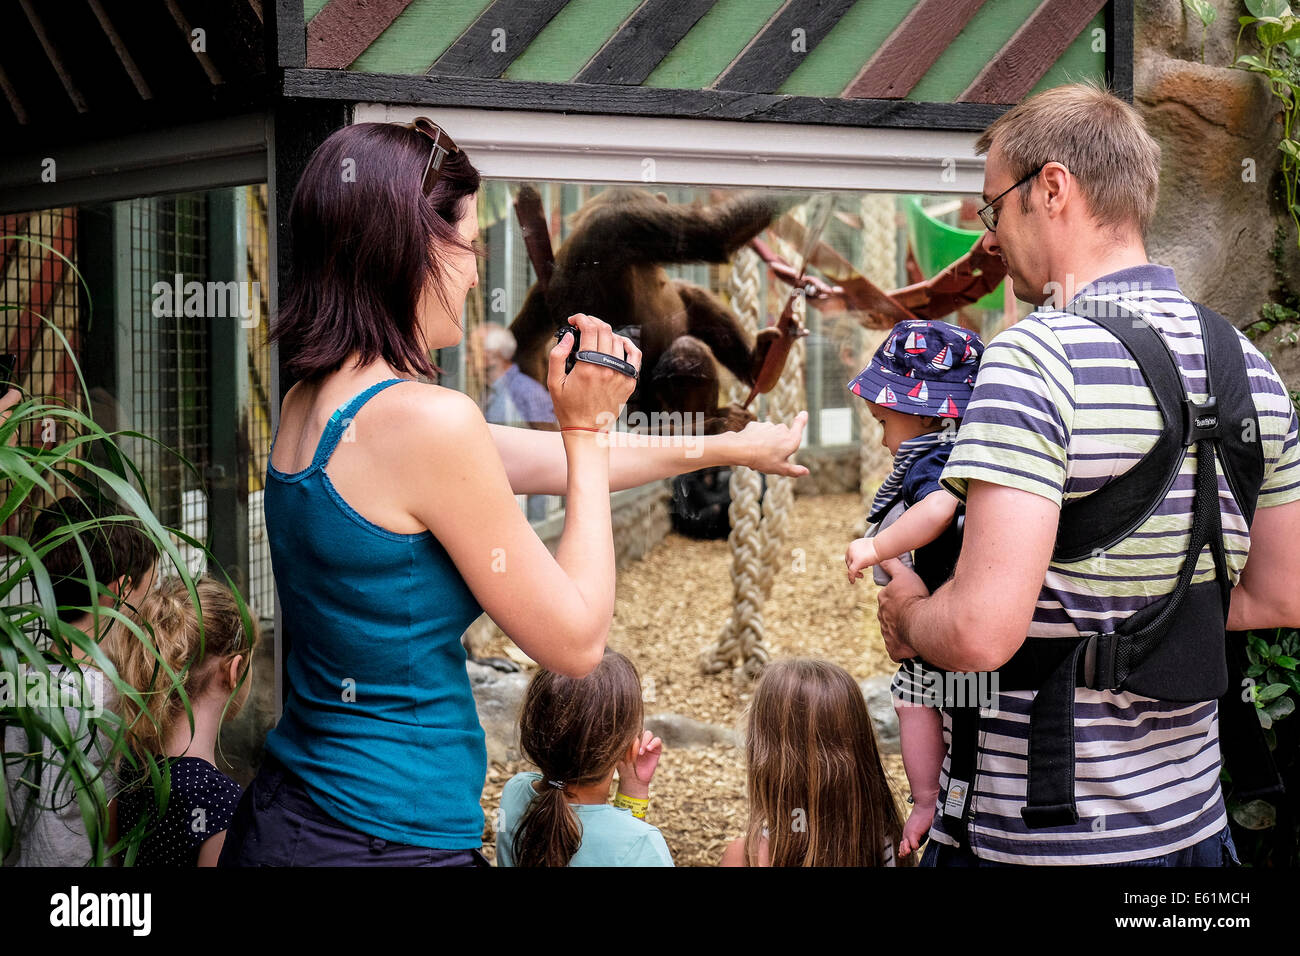 People looking at animals in a zoo. Stock Photo